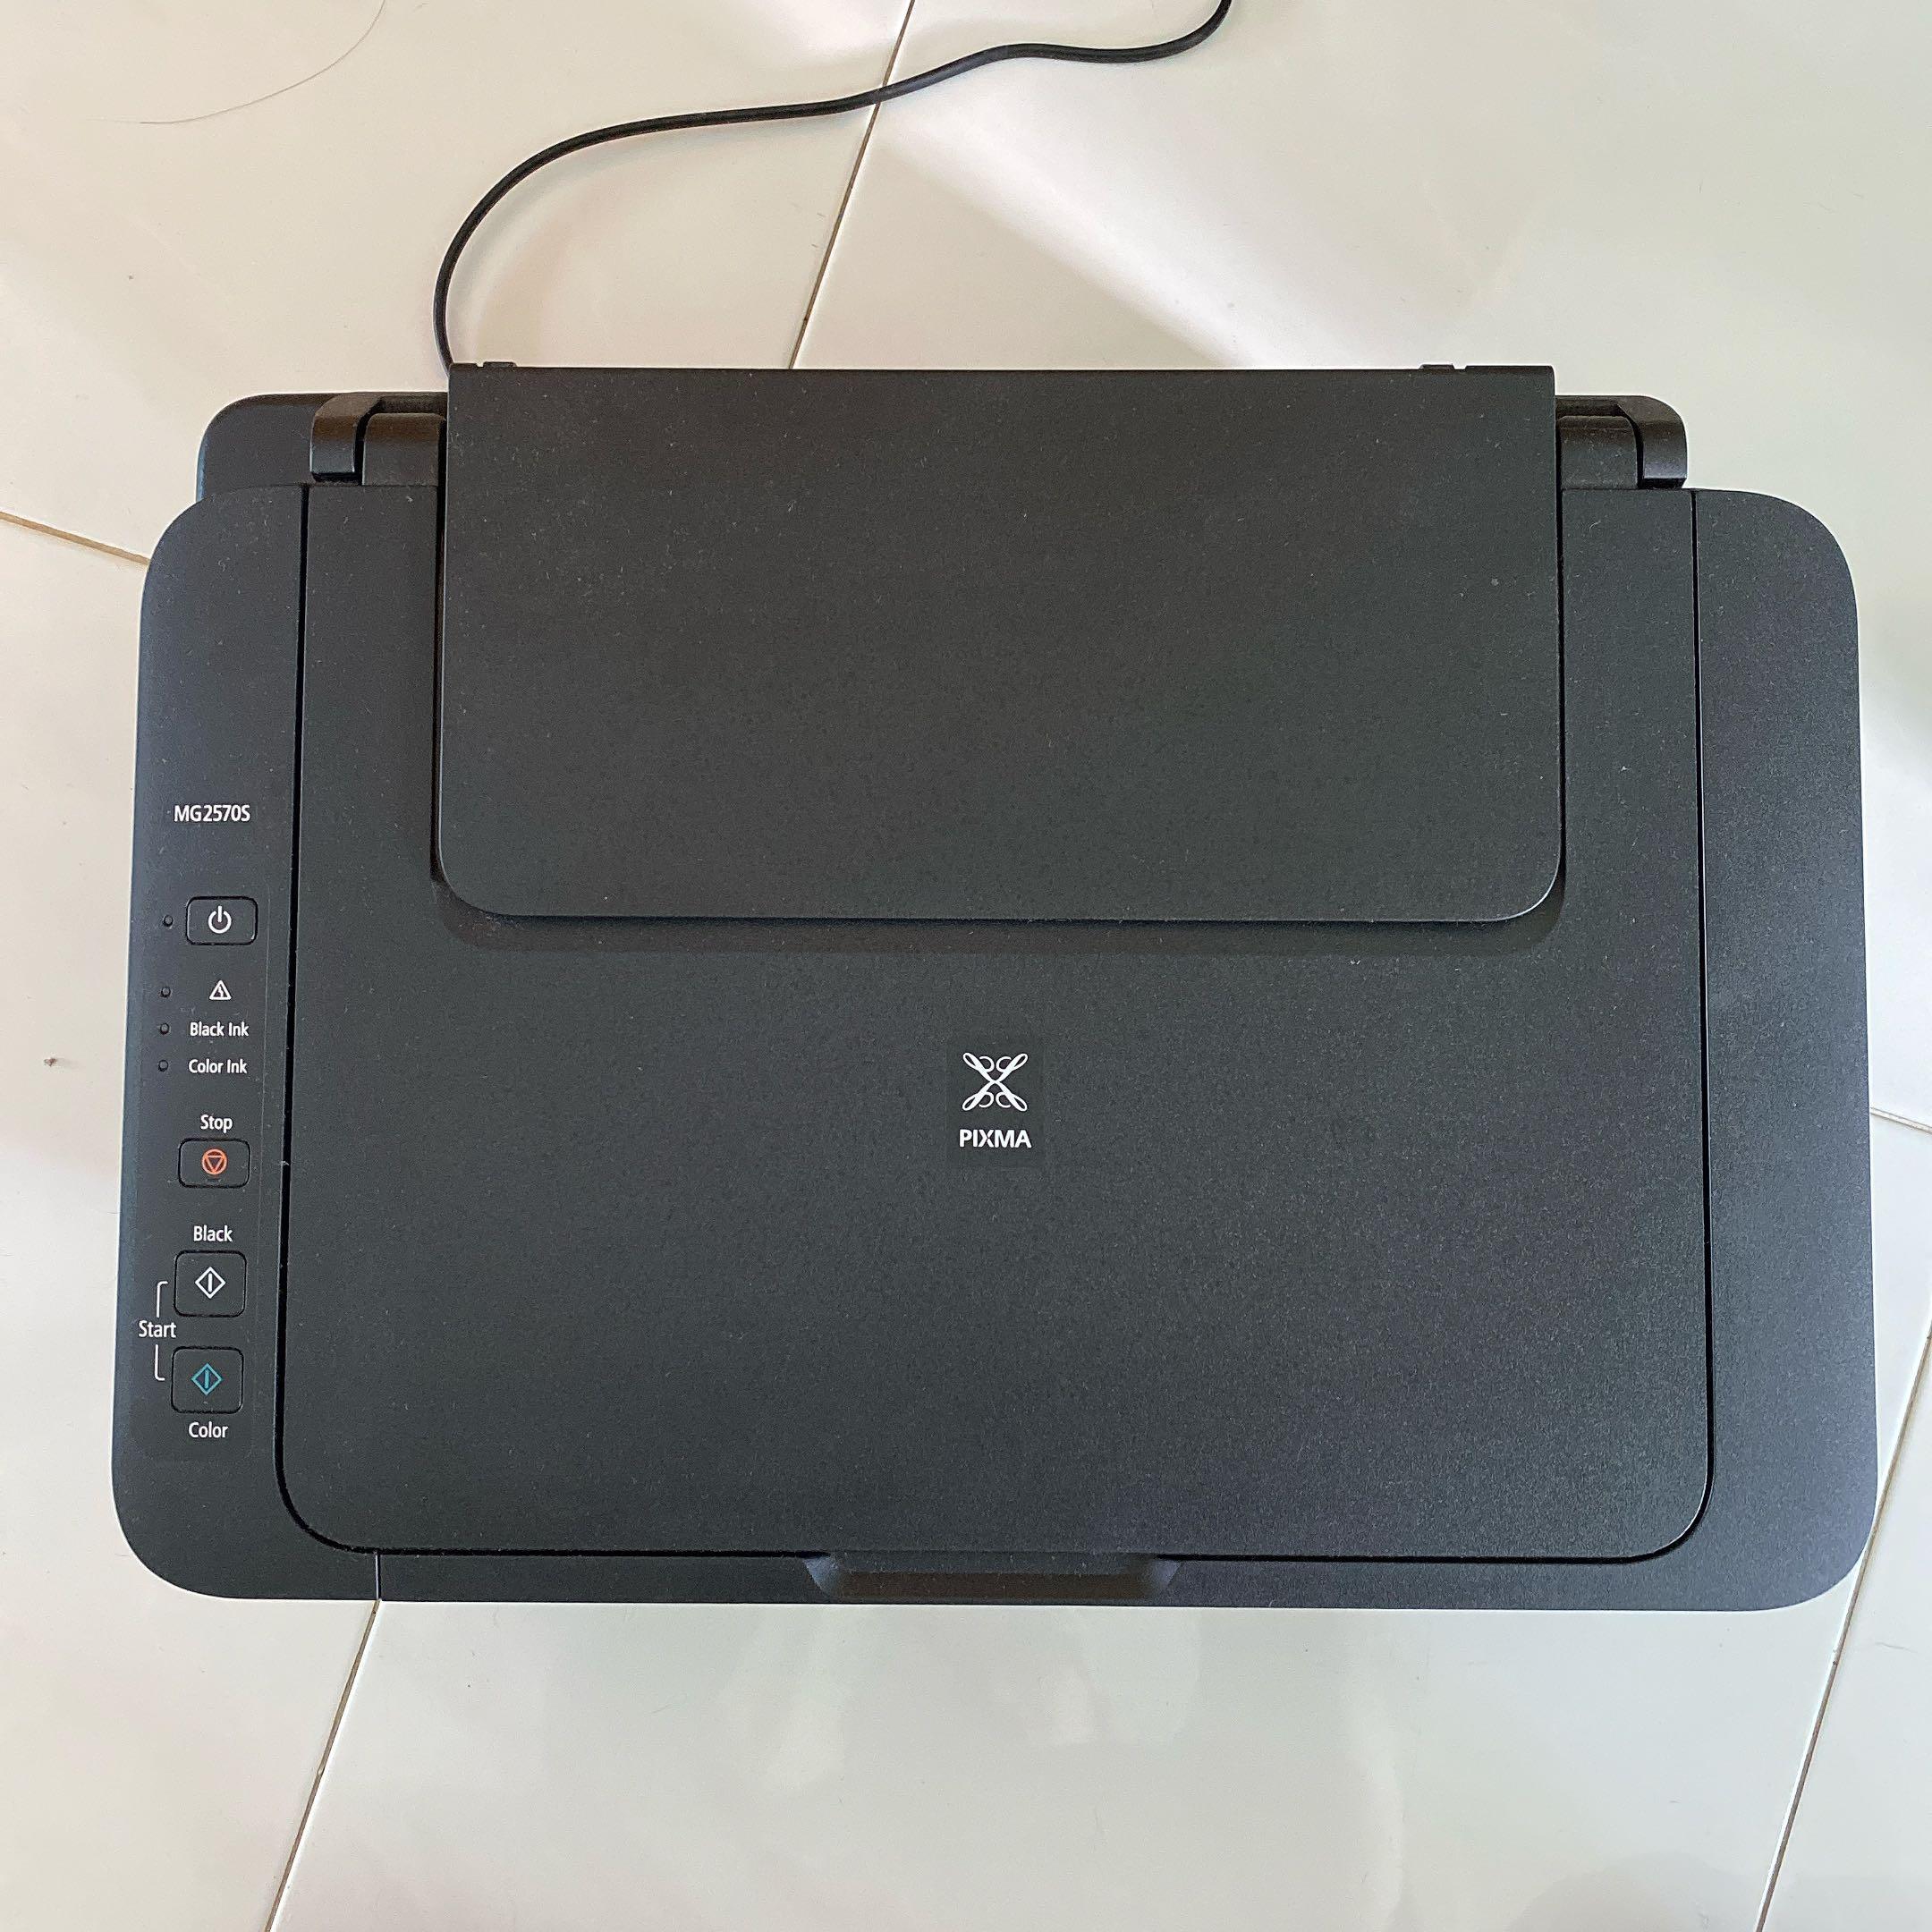 Pixma Mg2570s Canon Inkjet Printer Computers And Tech Printers Scanners And Copiers On Carousell 9055